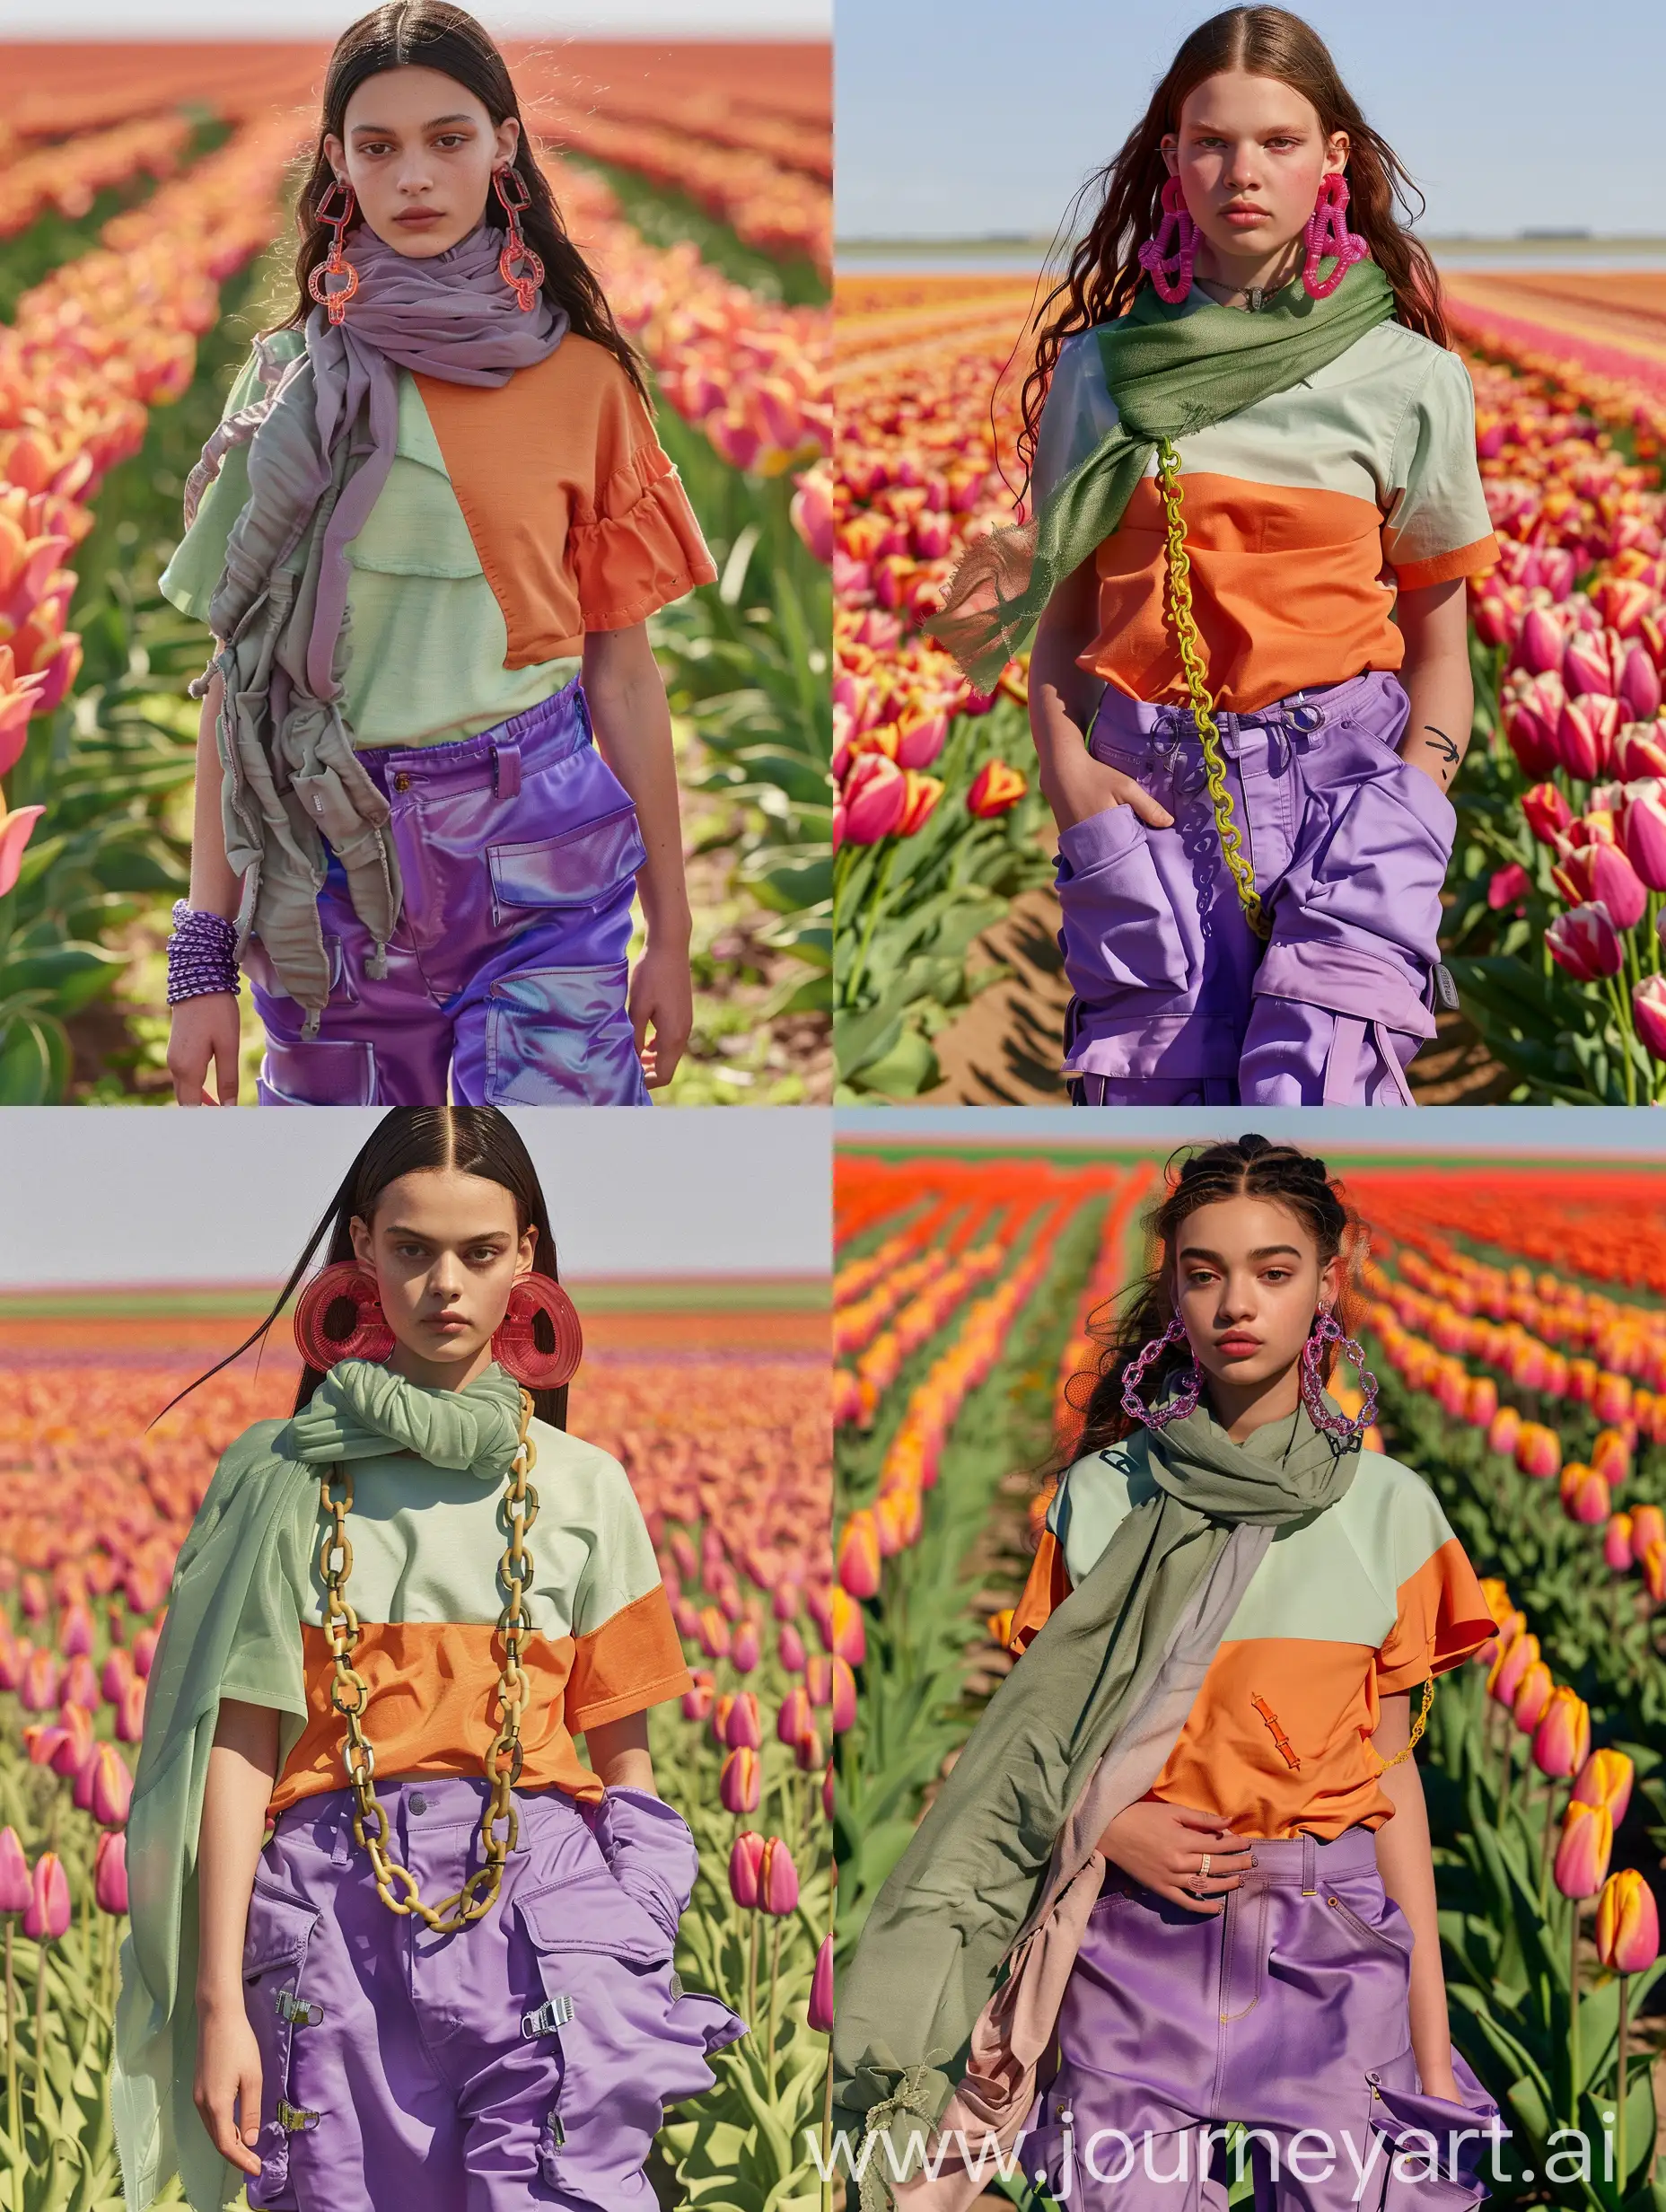 Model-Strolling-Through-Vibrant-Tulip-Field-in-Trendy-Spring-Outfit